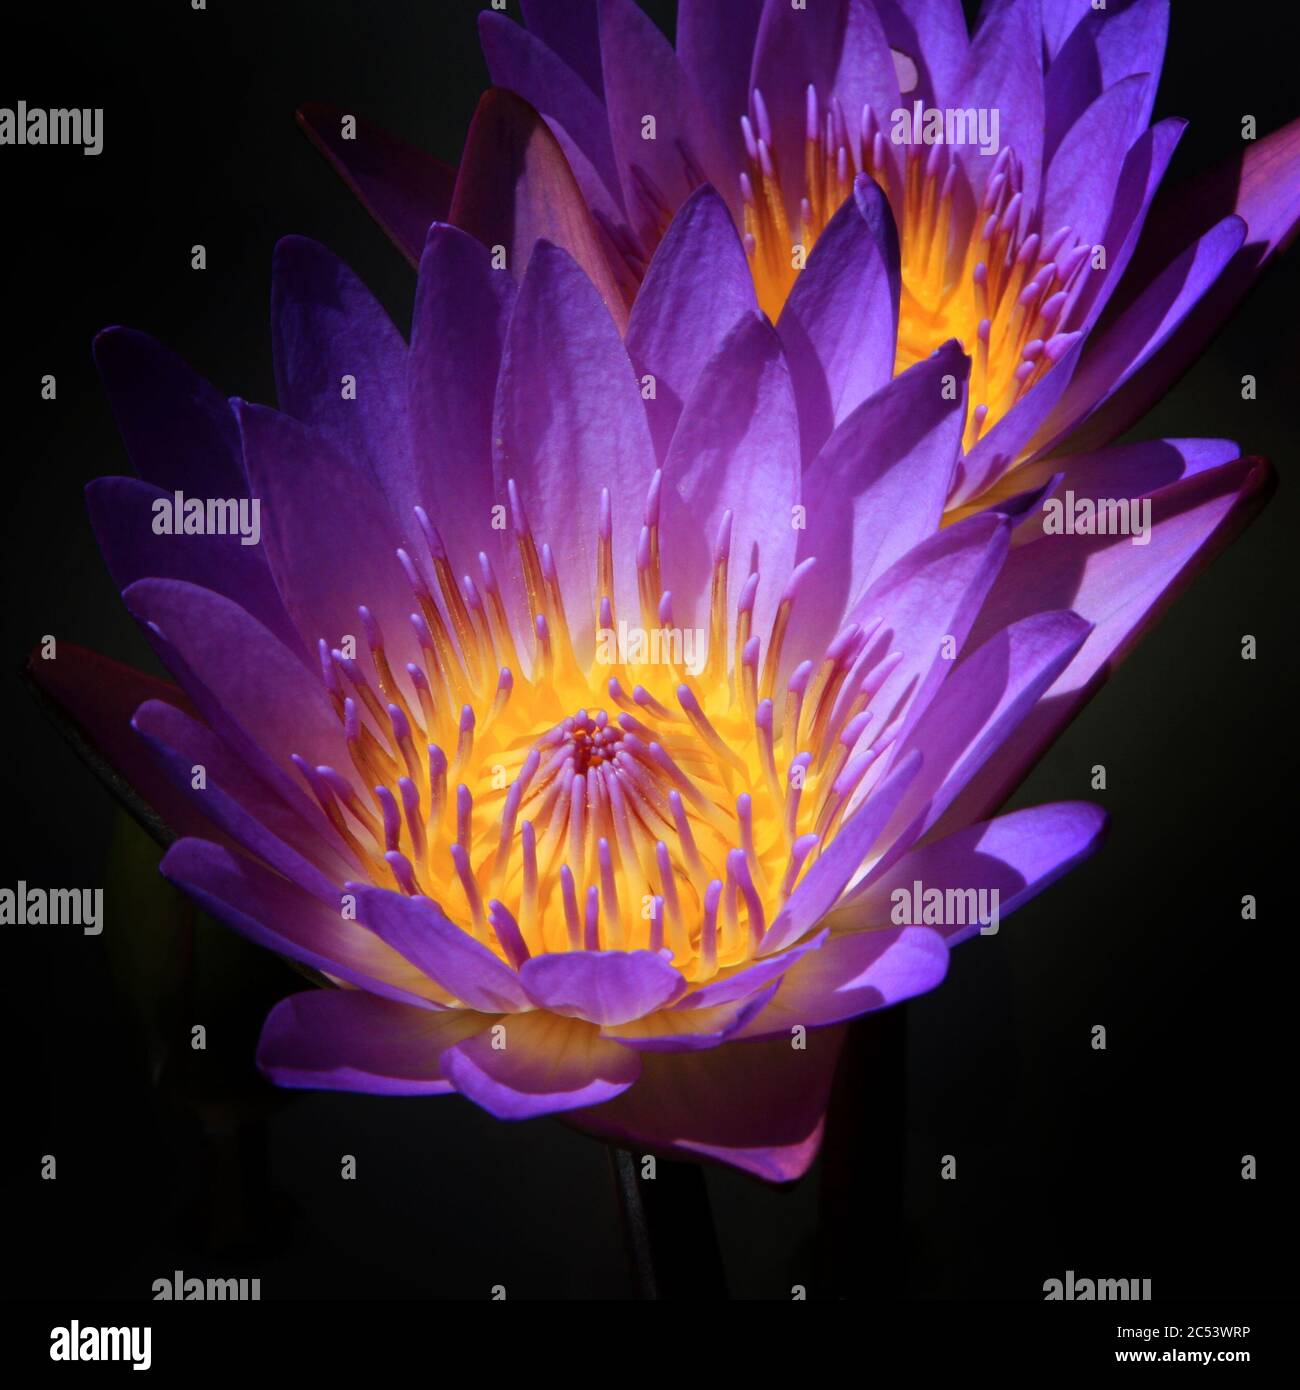 A water lily in full bloom. Stock Photo